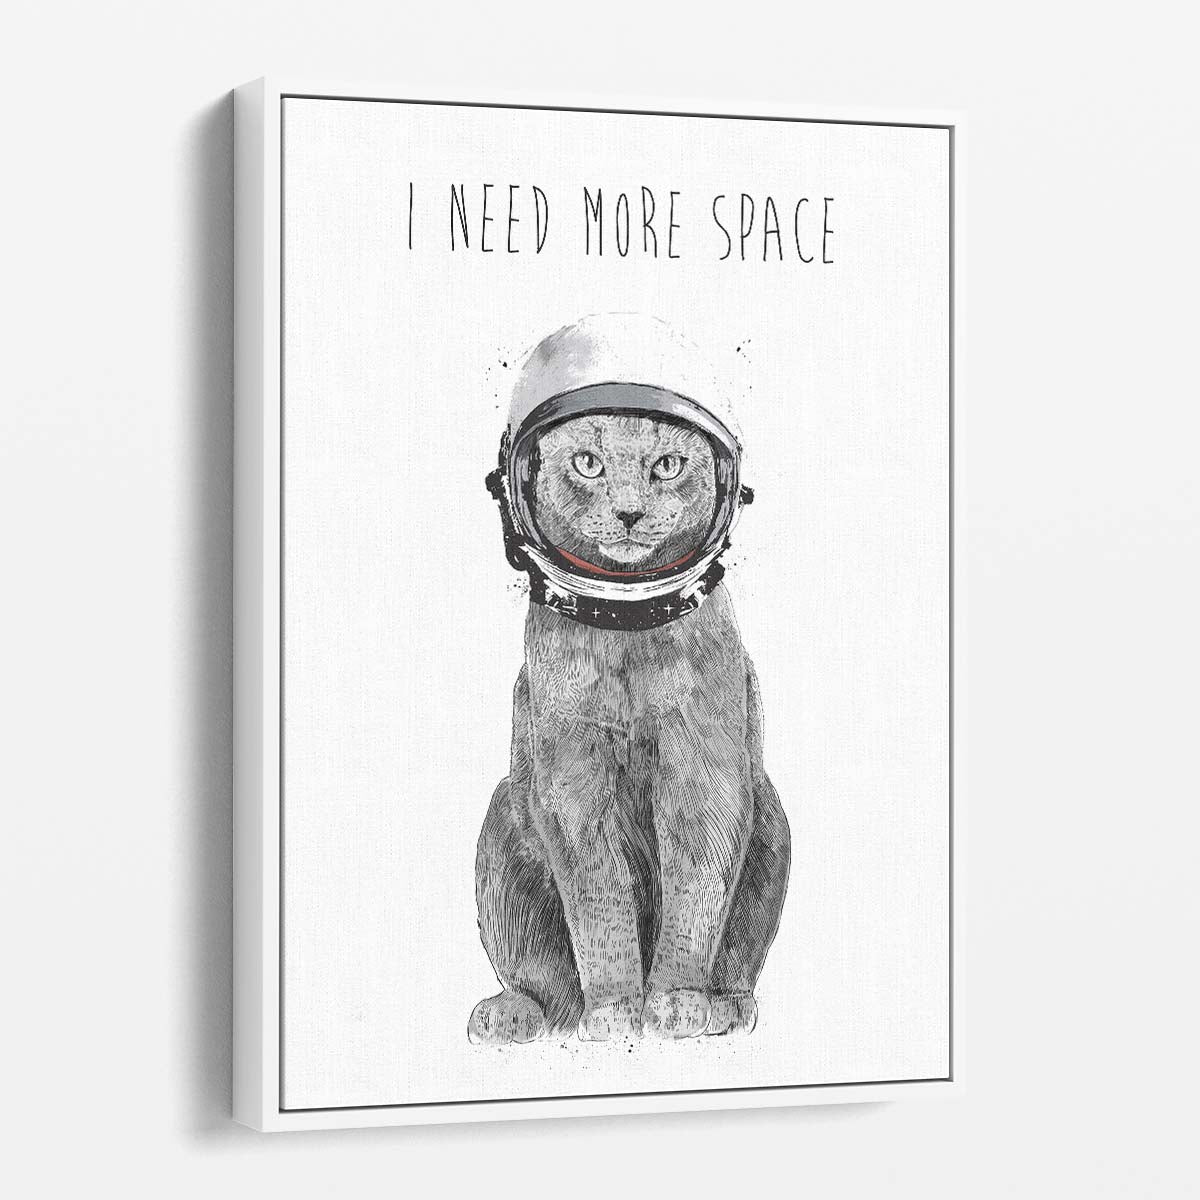 Funny Astronaut Cat Illustration, Motivational Quote Wall Art by Luxuriance Designs, made in USA